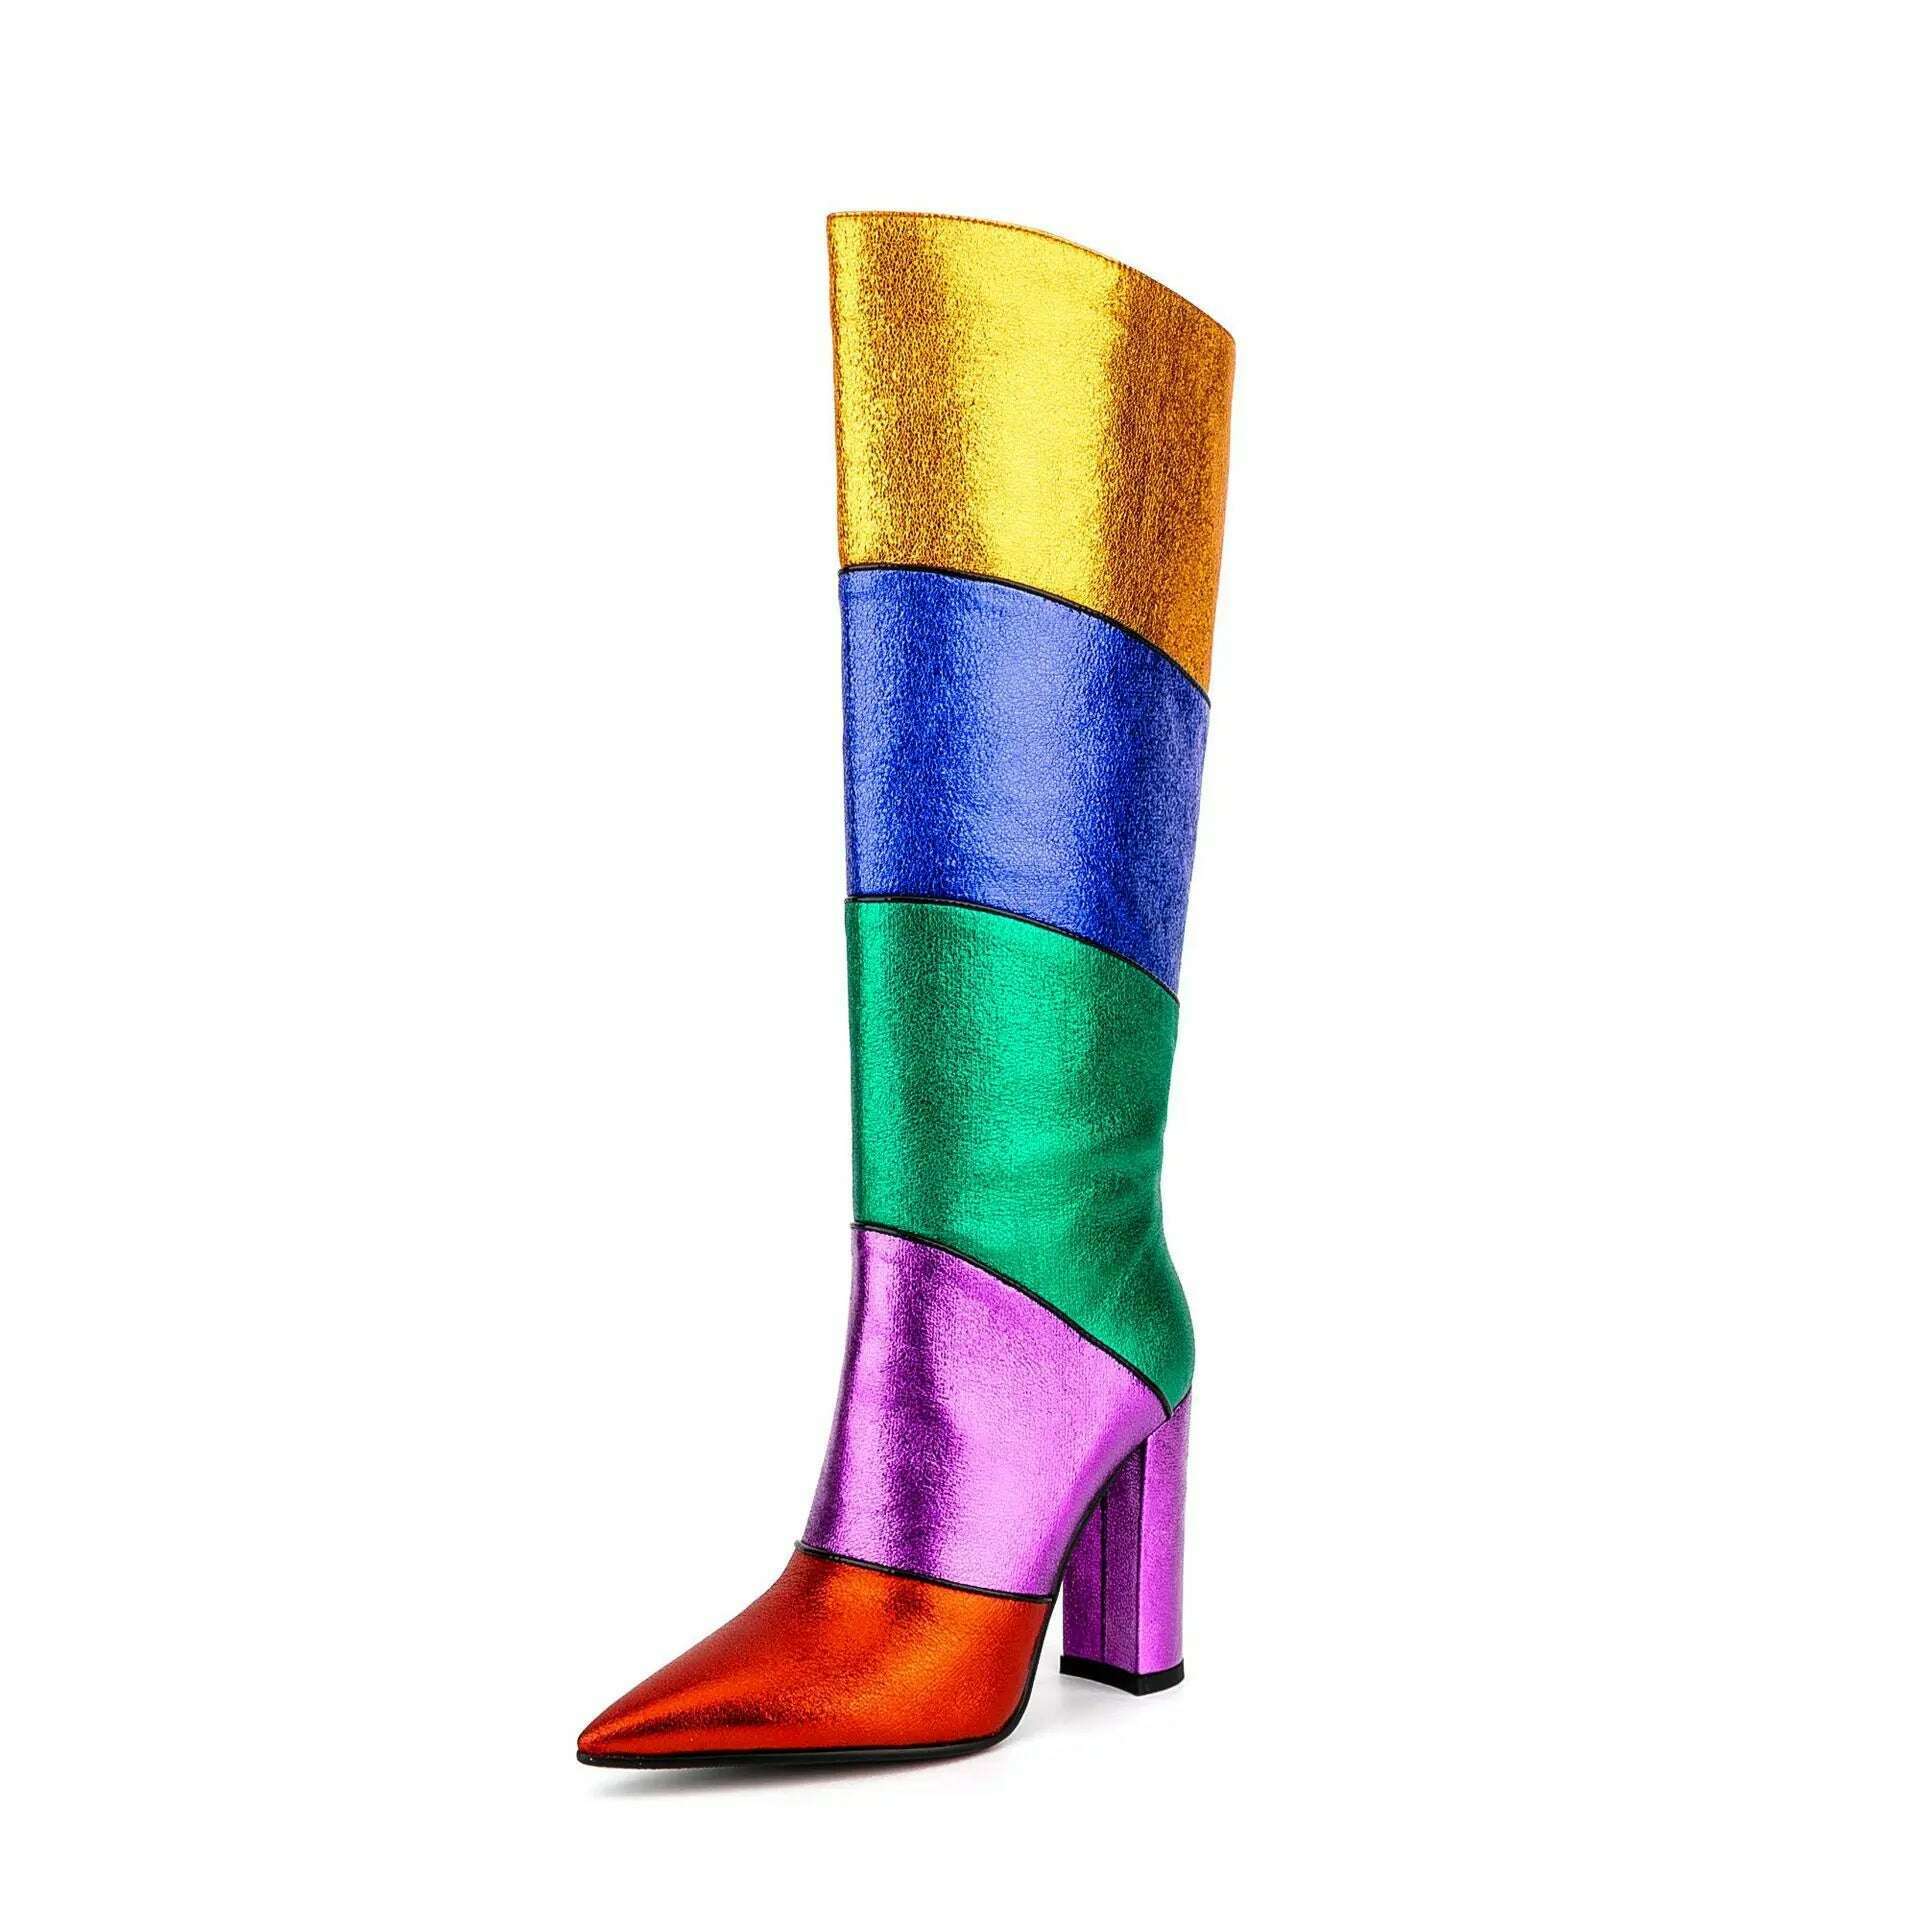 KIMLUD, Rainbow Colorful Pointed Toe Knee High Boots Block Heels Slip-Ob Mixed Color Sewing Spring Women Bright Shiny Leather Shoes, multi / 34 / China, KIMLUD Womens Clothes